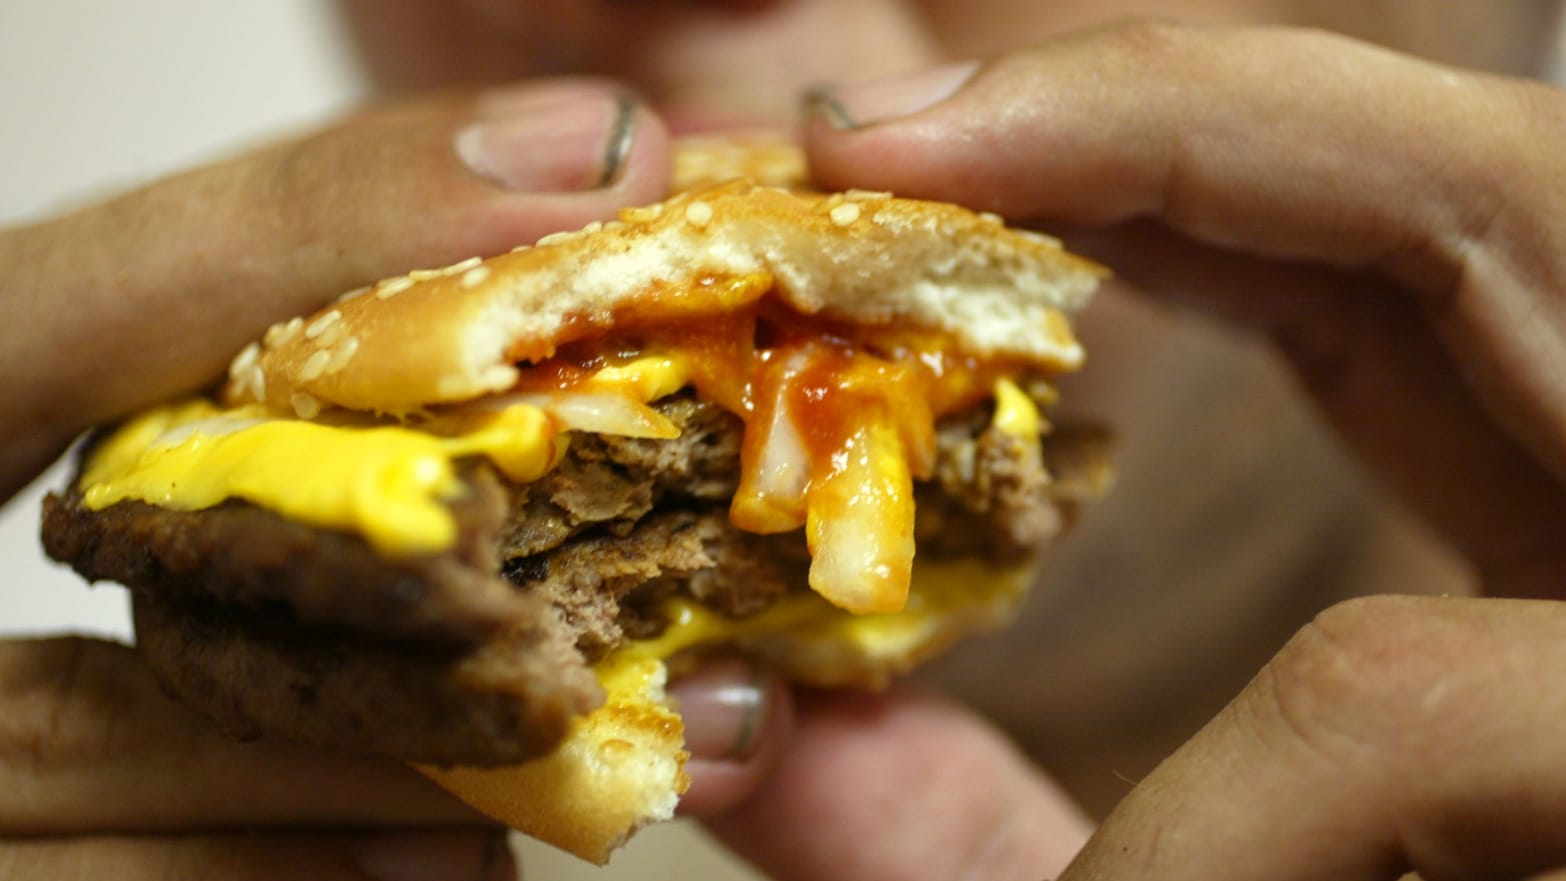 A close-up photo of a man’s hands holding a Big Mac, about to take a bite.